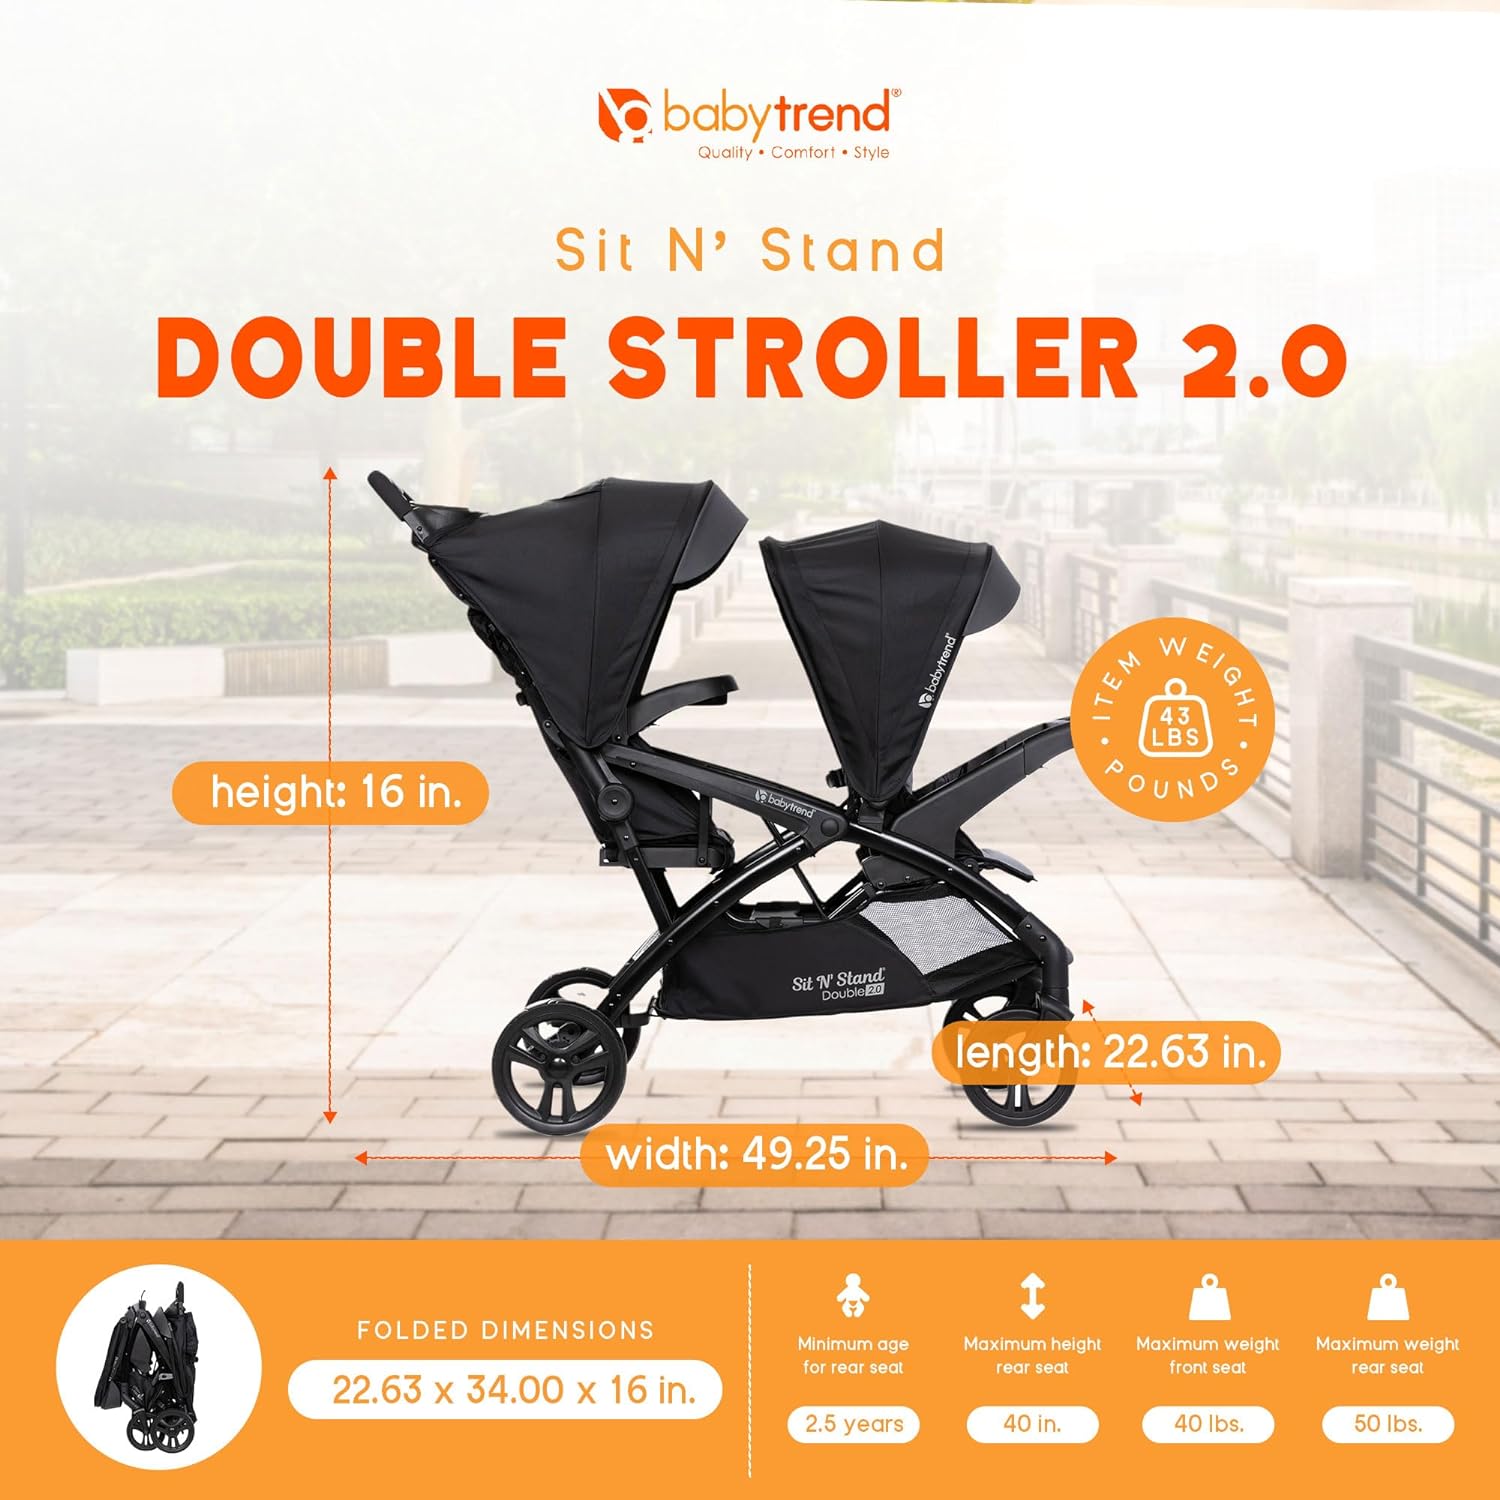 Baby Trend Sit N Stand Double Stroller 2.0 DLX with 5 Point Safety Harness, Canopy, Extra Basket, 2 Cup Holders, and Covered Compartment, Stormy - Baby Trend Sit N' Stand Double Stroller 2.0 DLX Review